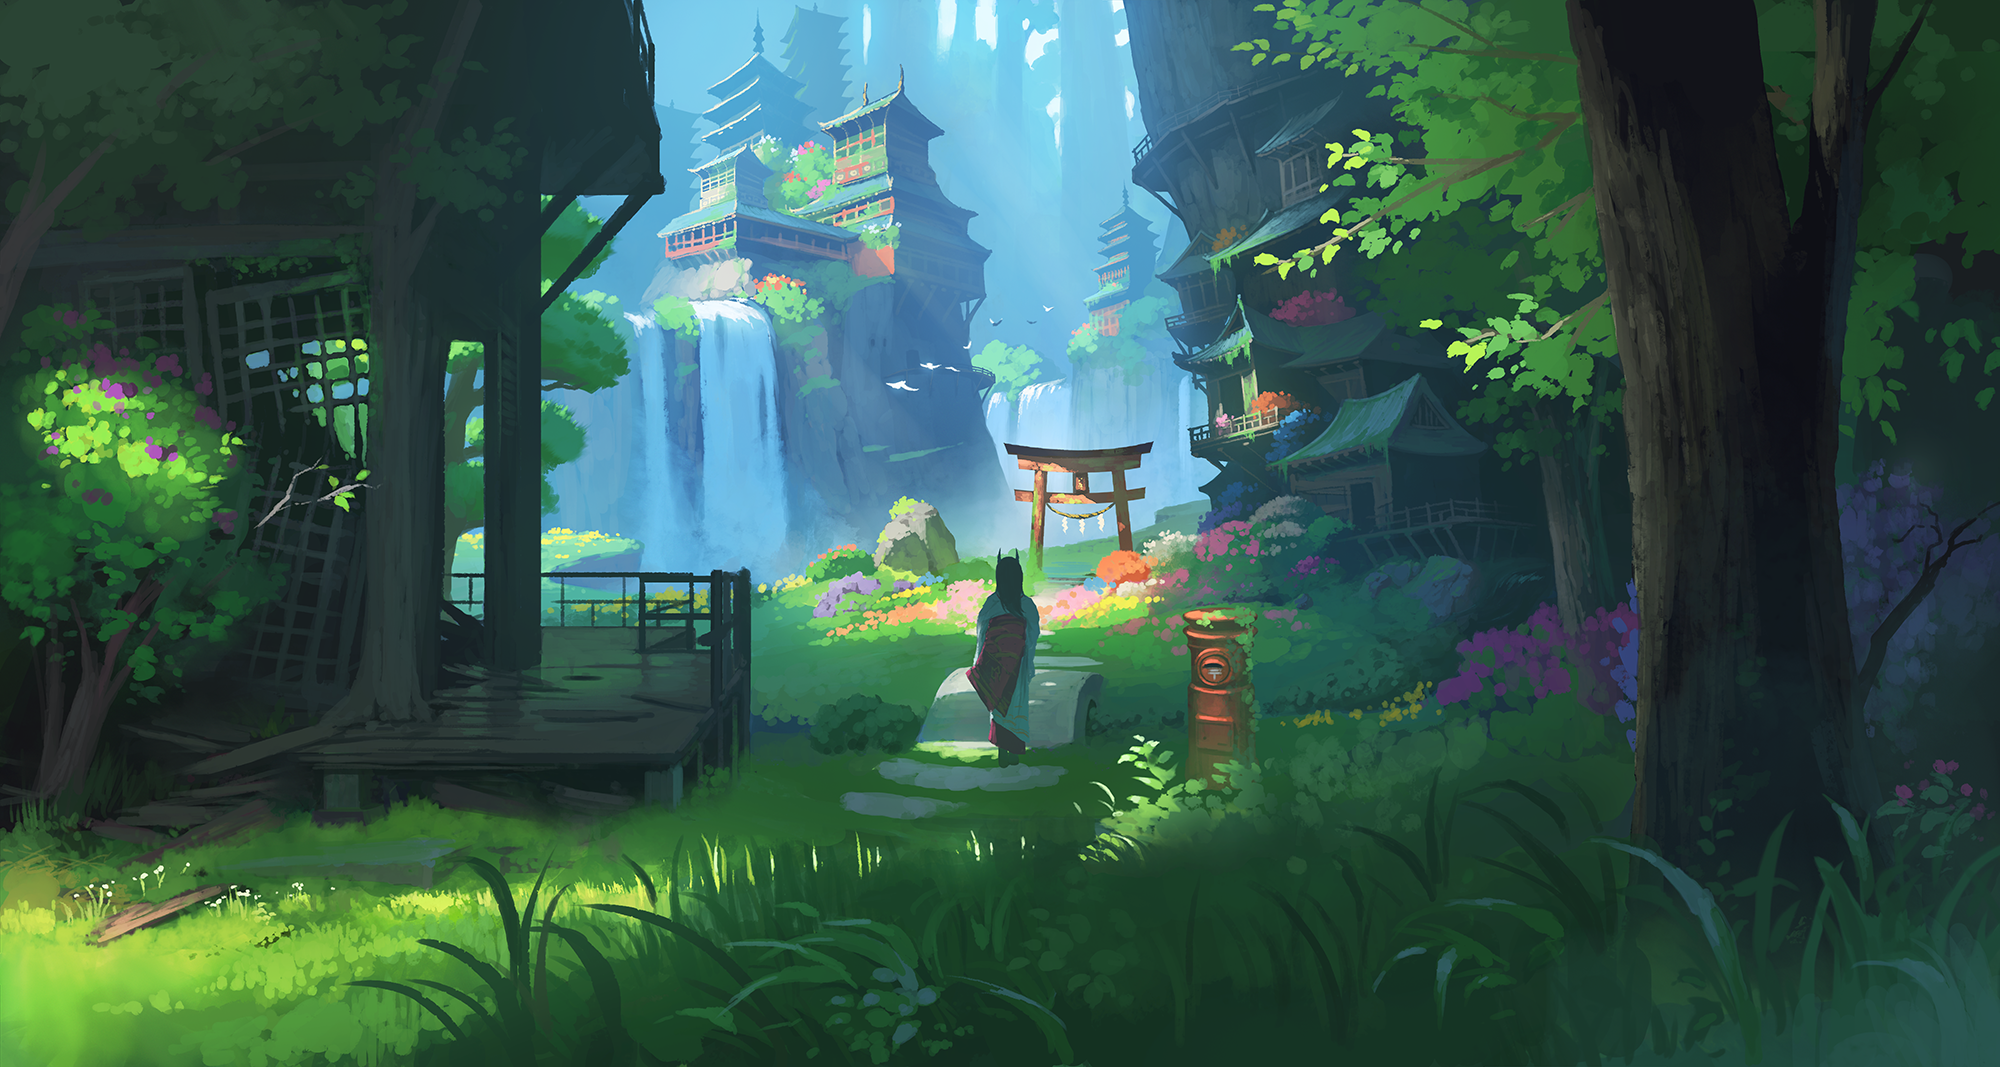 Anime 2000x1067 anime girls landscape artwork traditional art Asian architecture trees waterfall flowers mountains grass torii